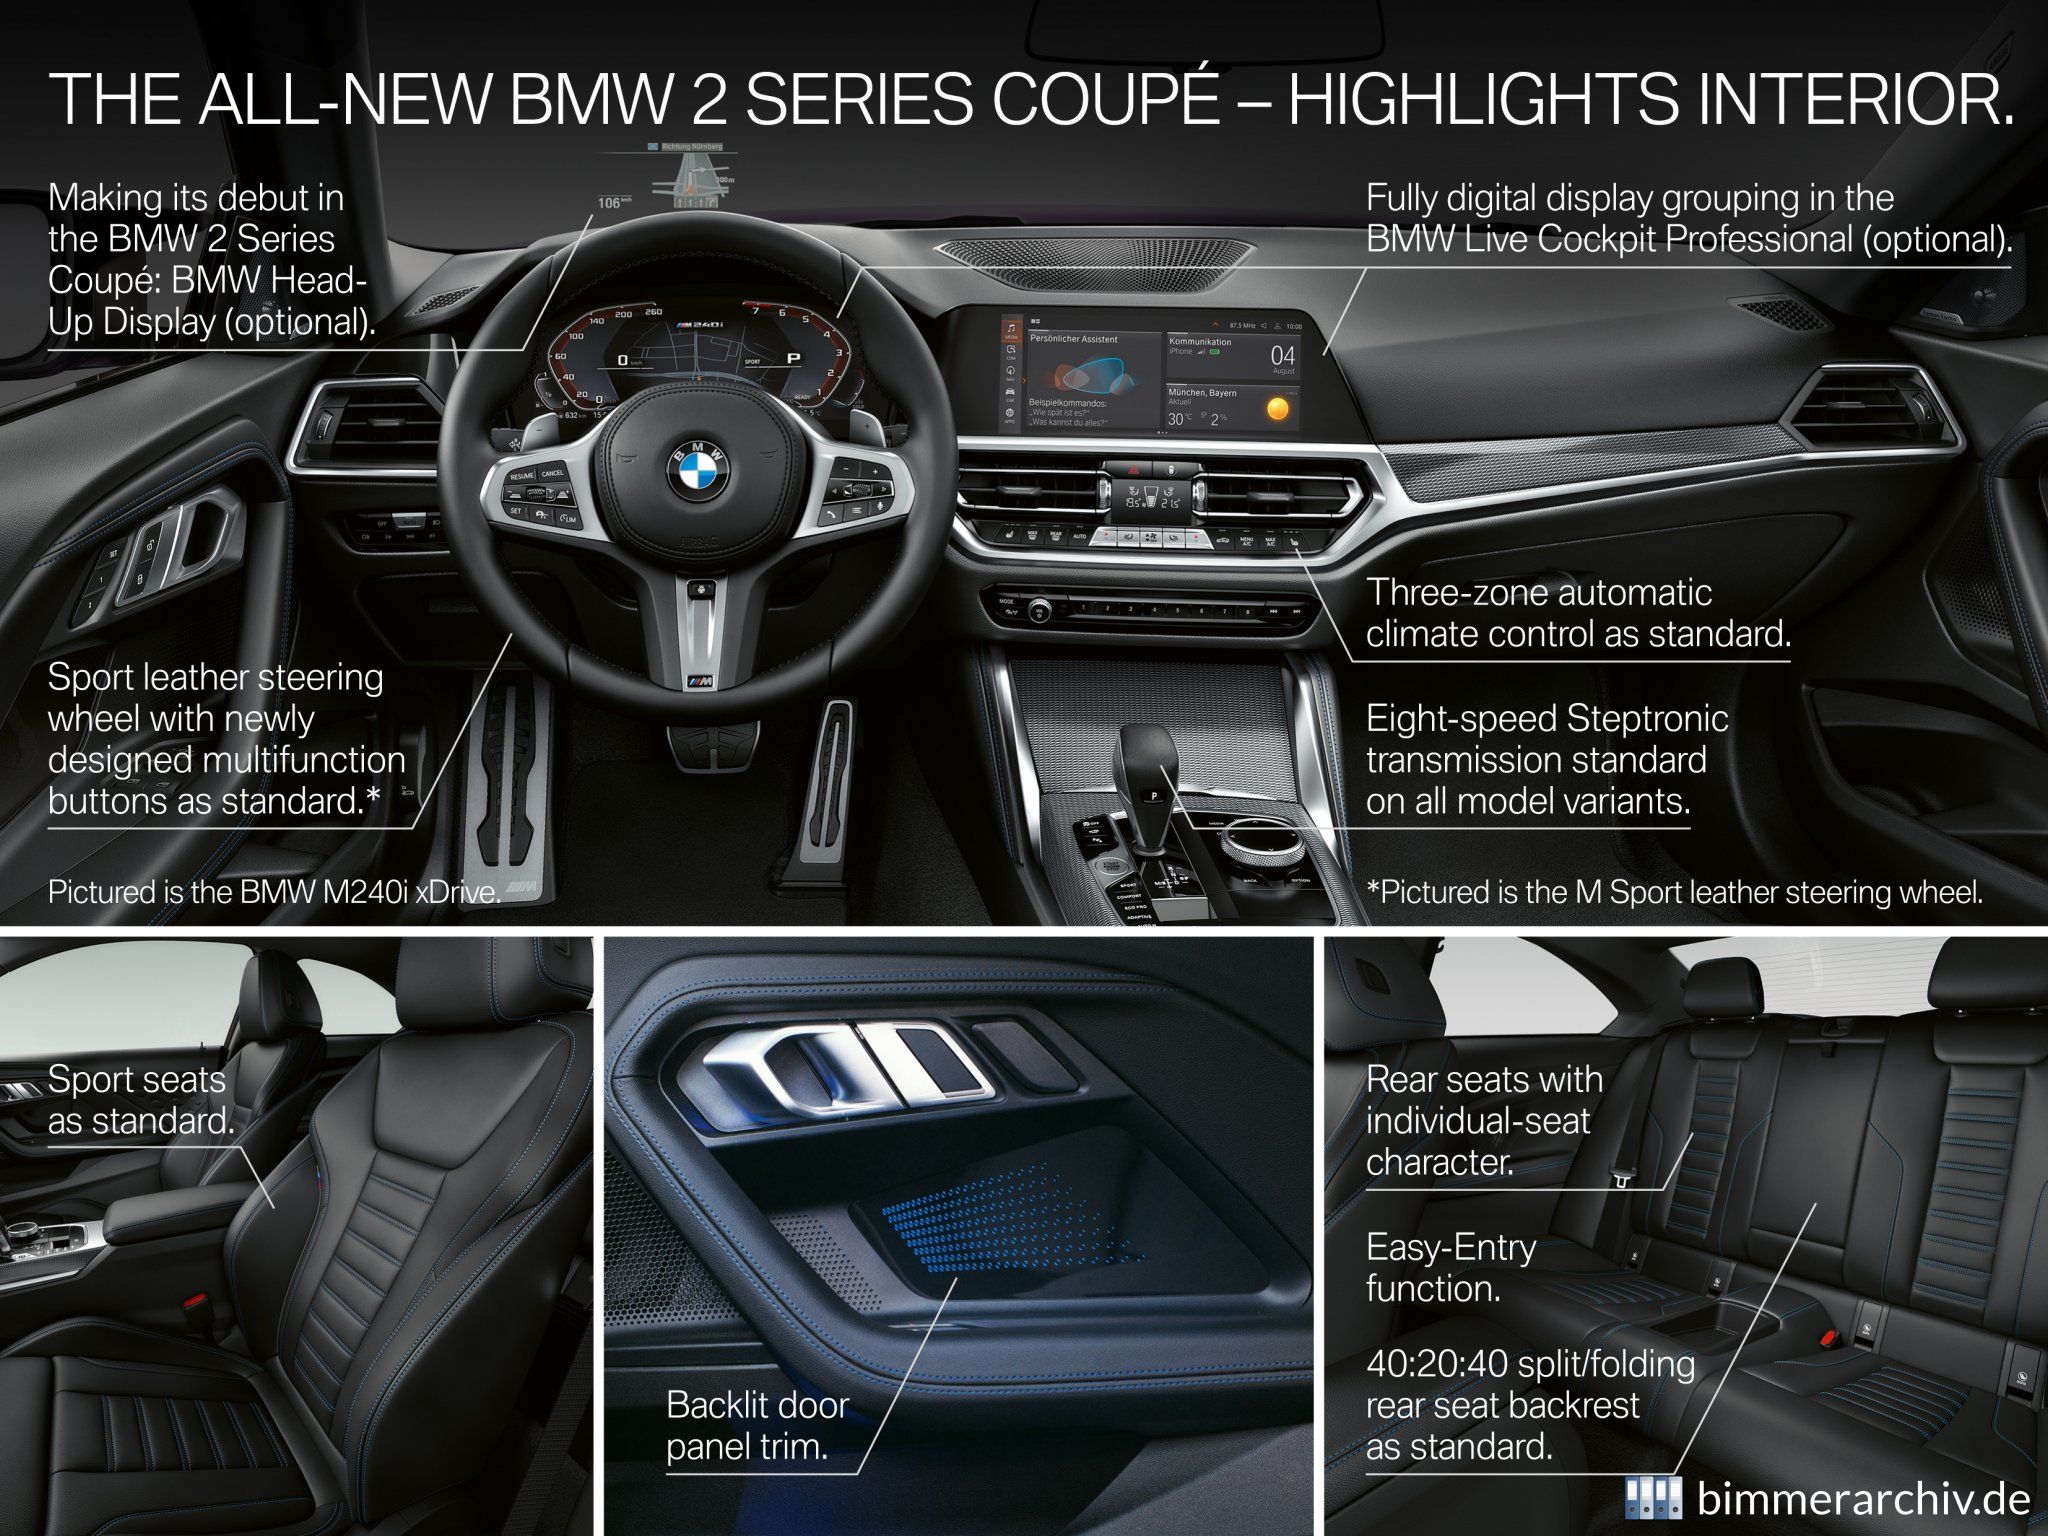 BMW 2 Series Coupe - Highlights